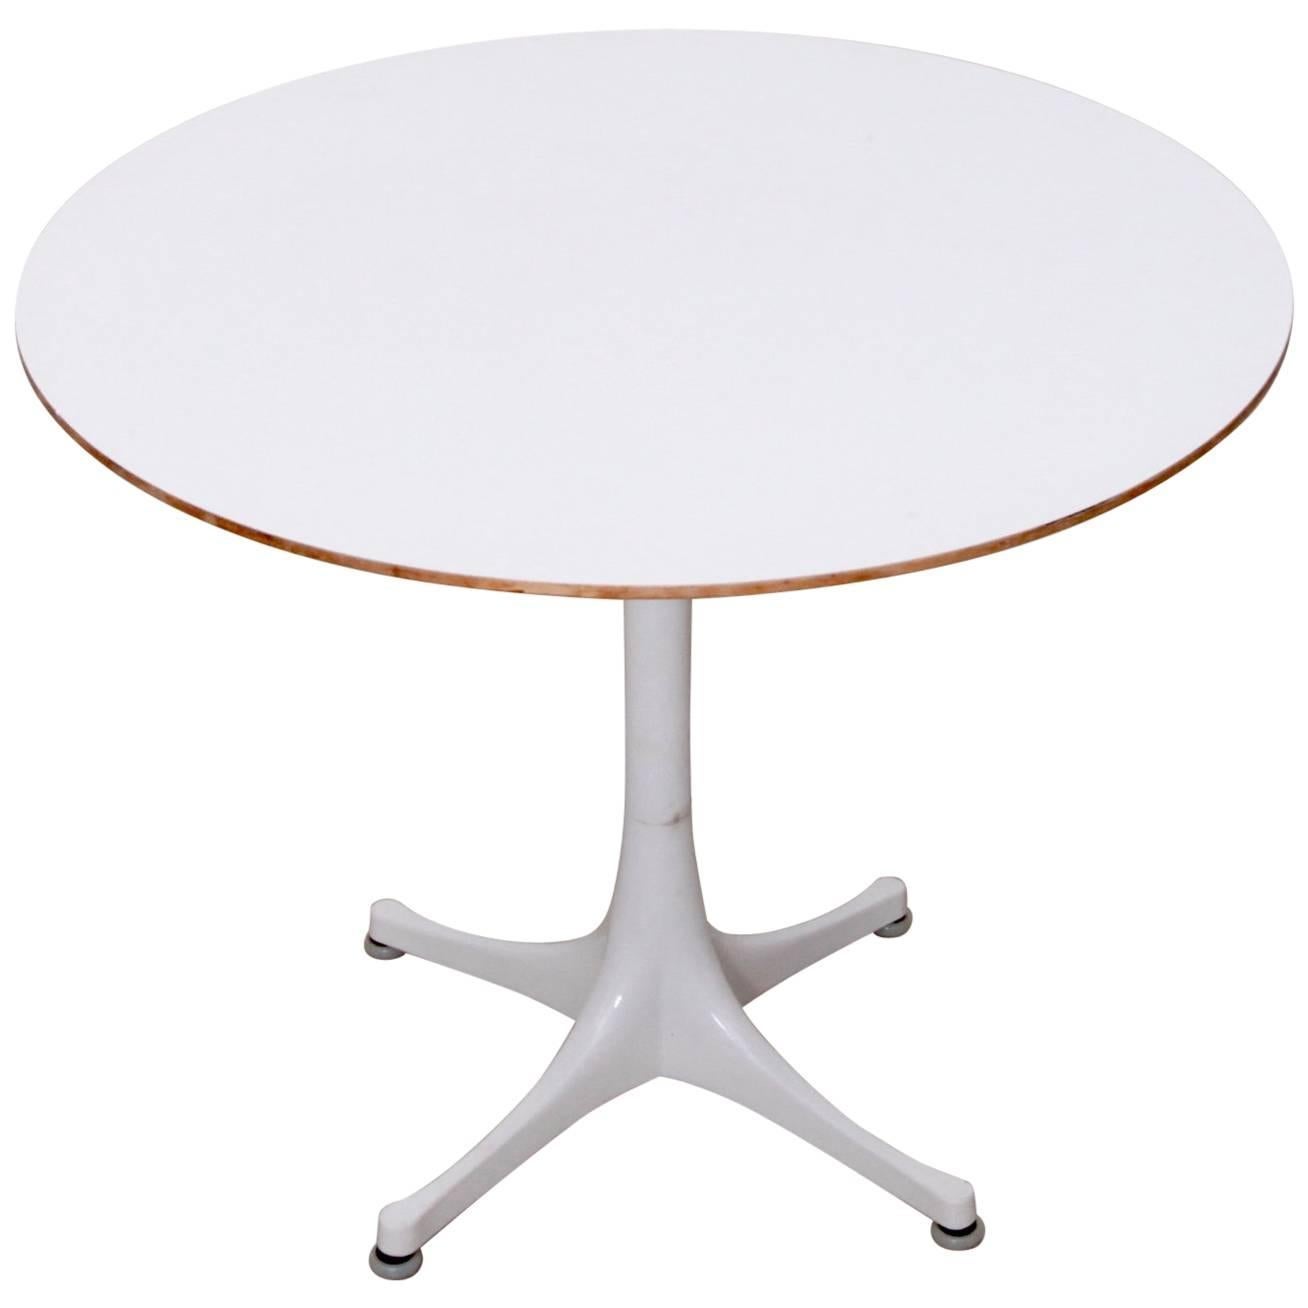 George Nelson Pedestal Table